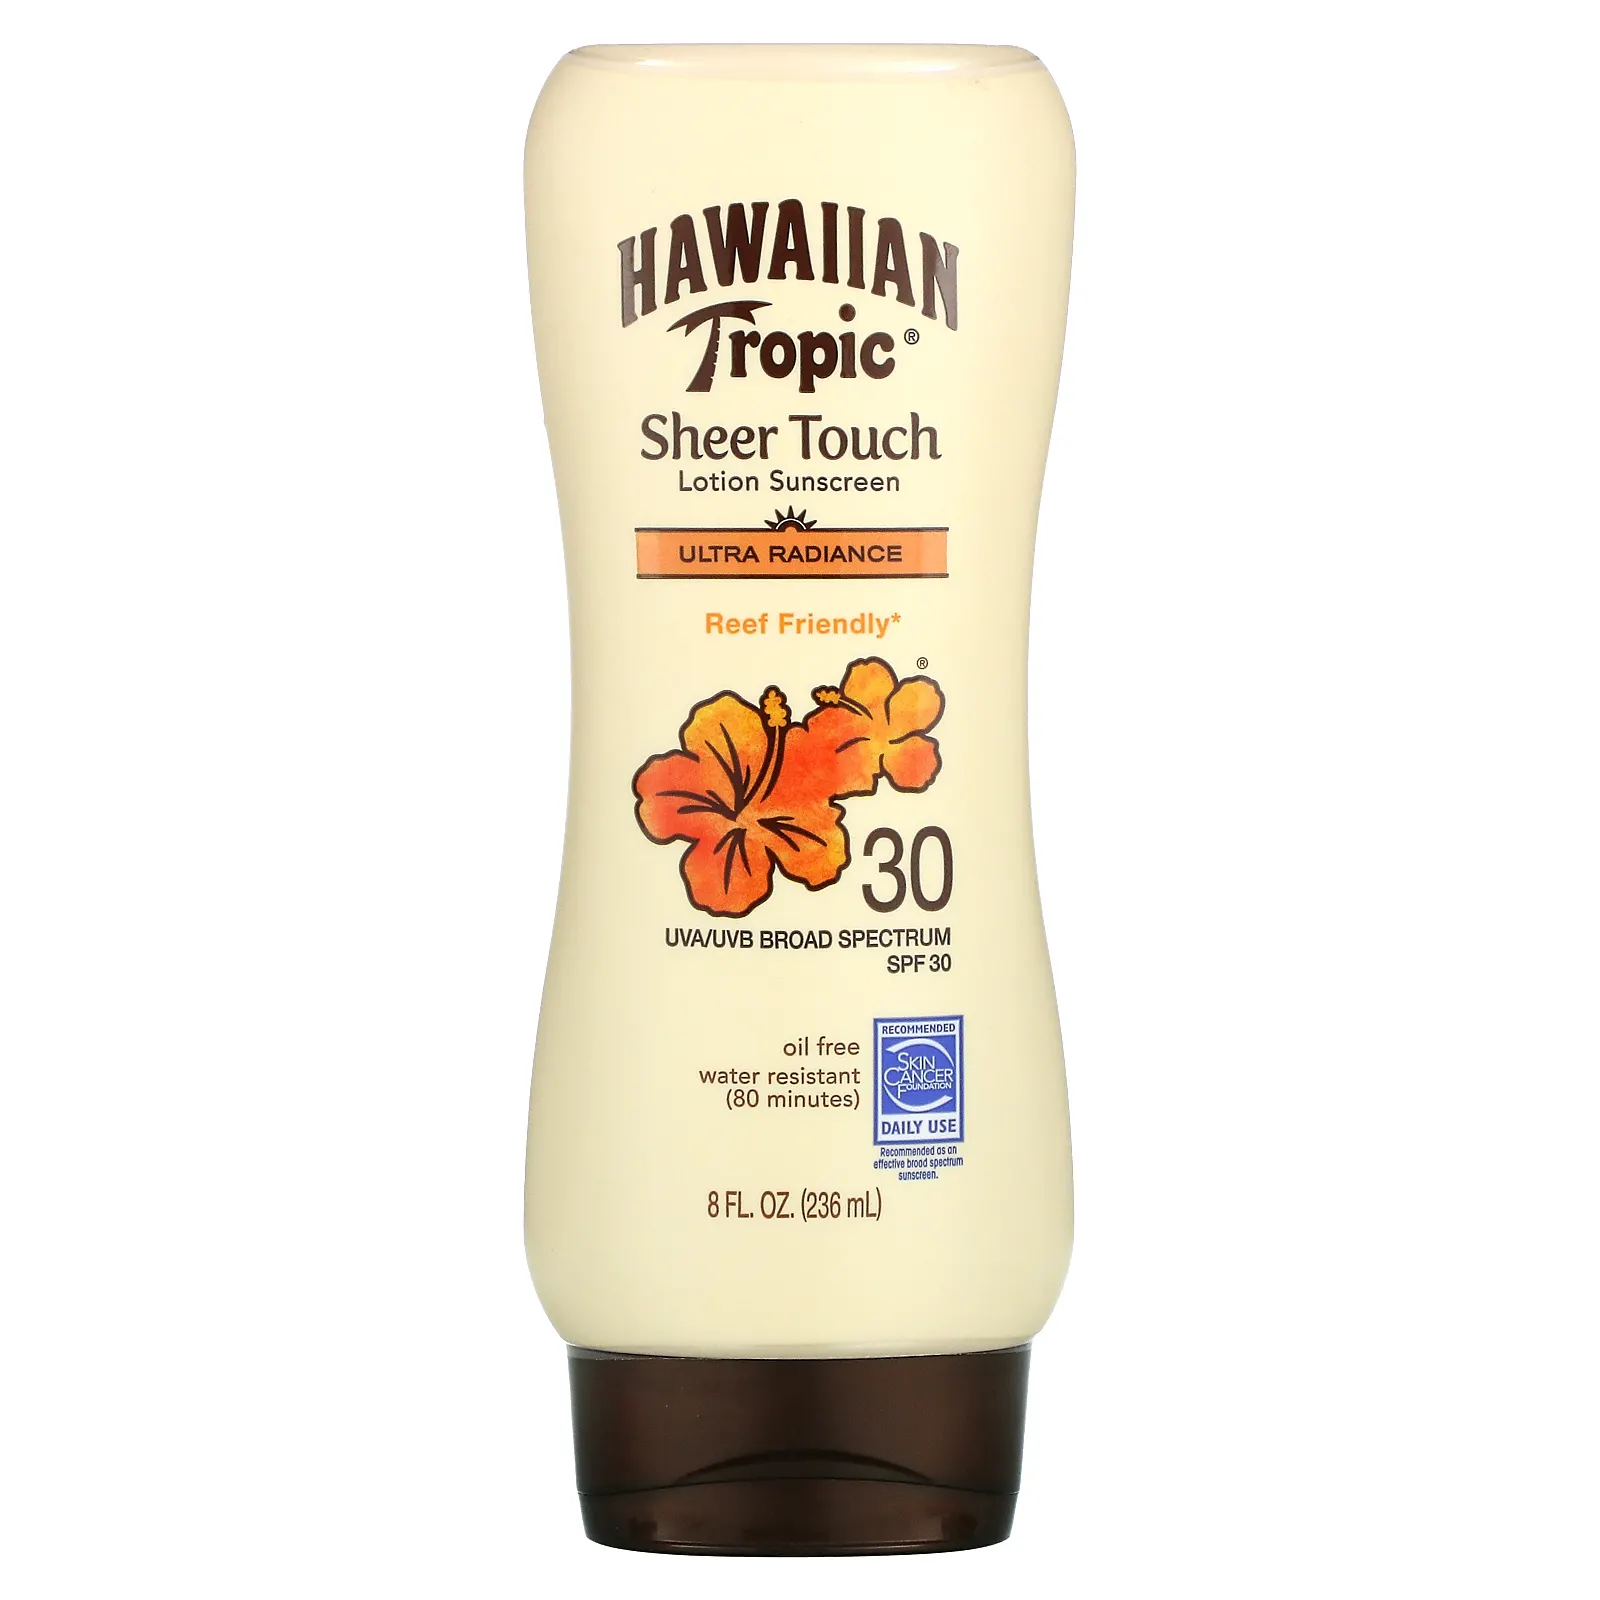 Sheer Touch Ultra Radiance Sunscreen Lotion by Hawaiian Tropic, Protects and softens for radiant skin..